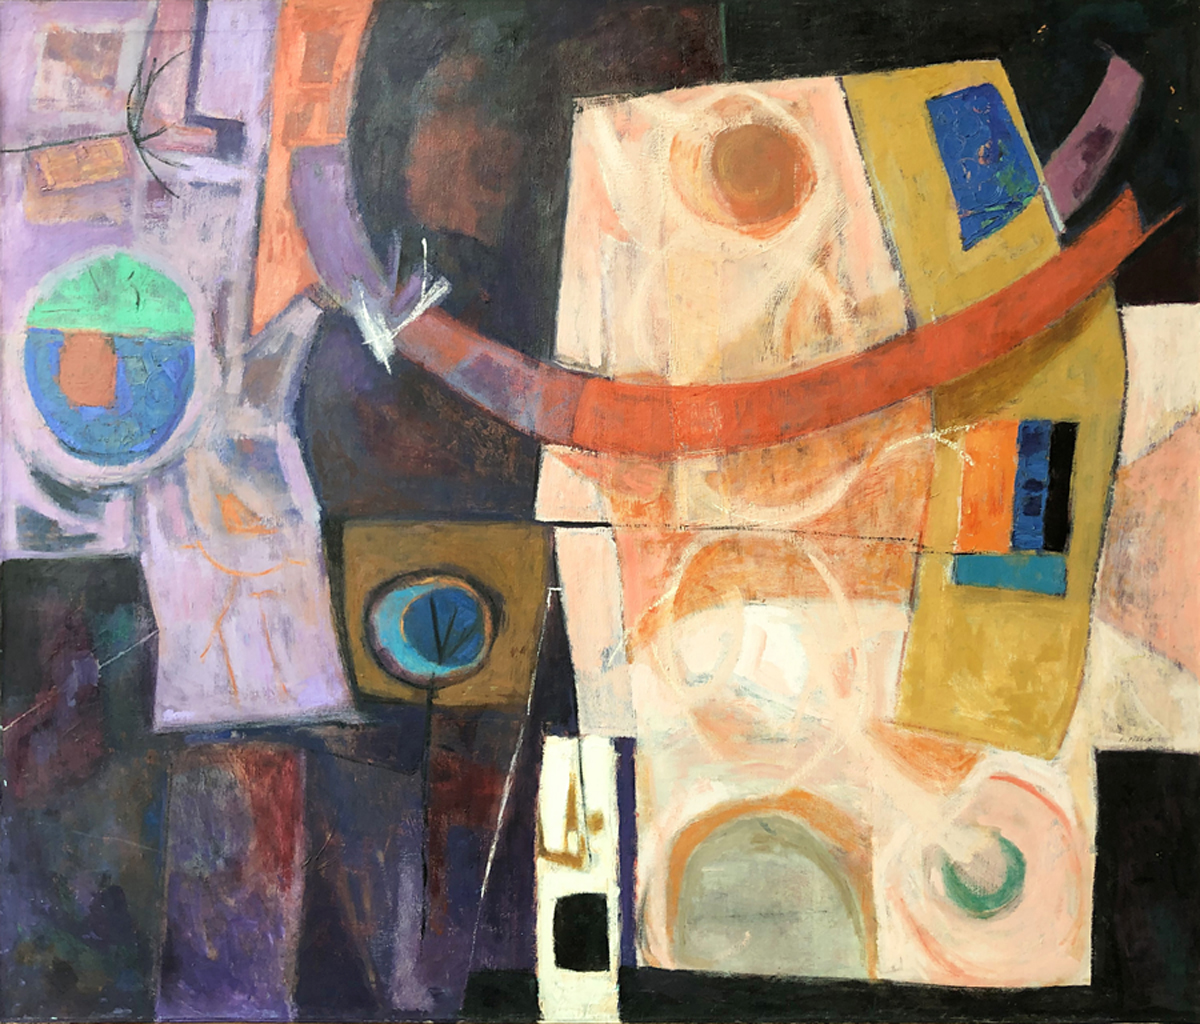 Constellation: Abstract Painting by Ethel Fisher, 1957, oil on canvas, 48 x 60 inches, mid-twentieth century abstract painting, widely exhibited in Havana, Cuba.